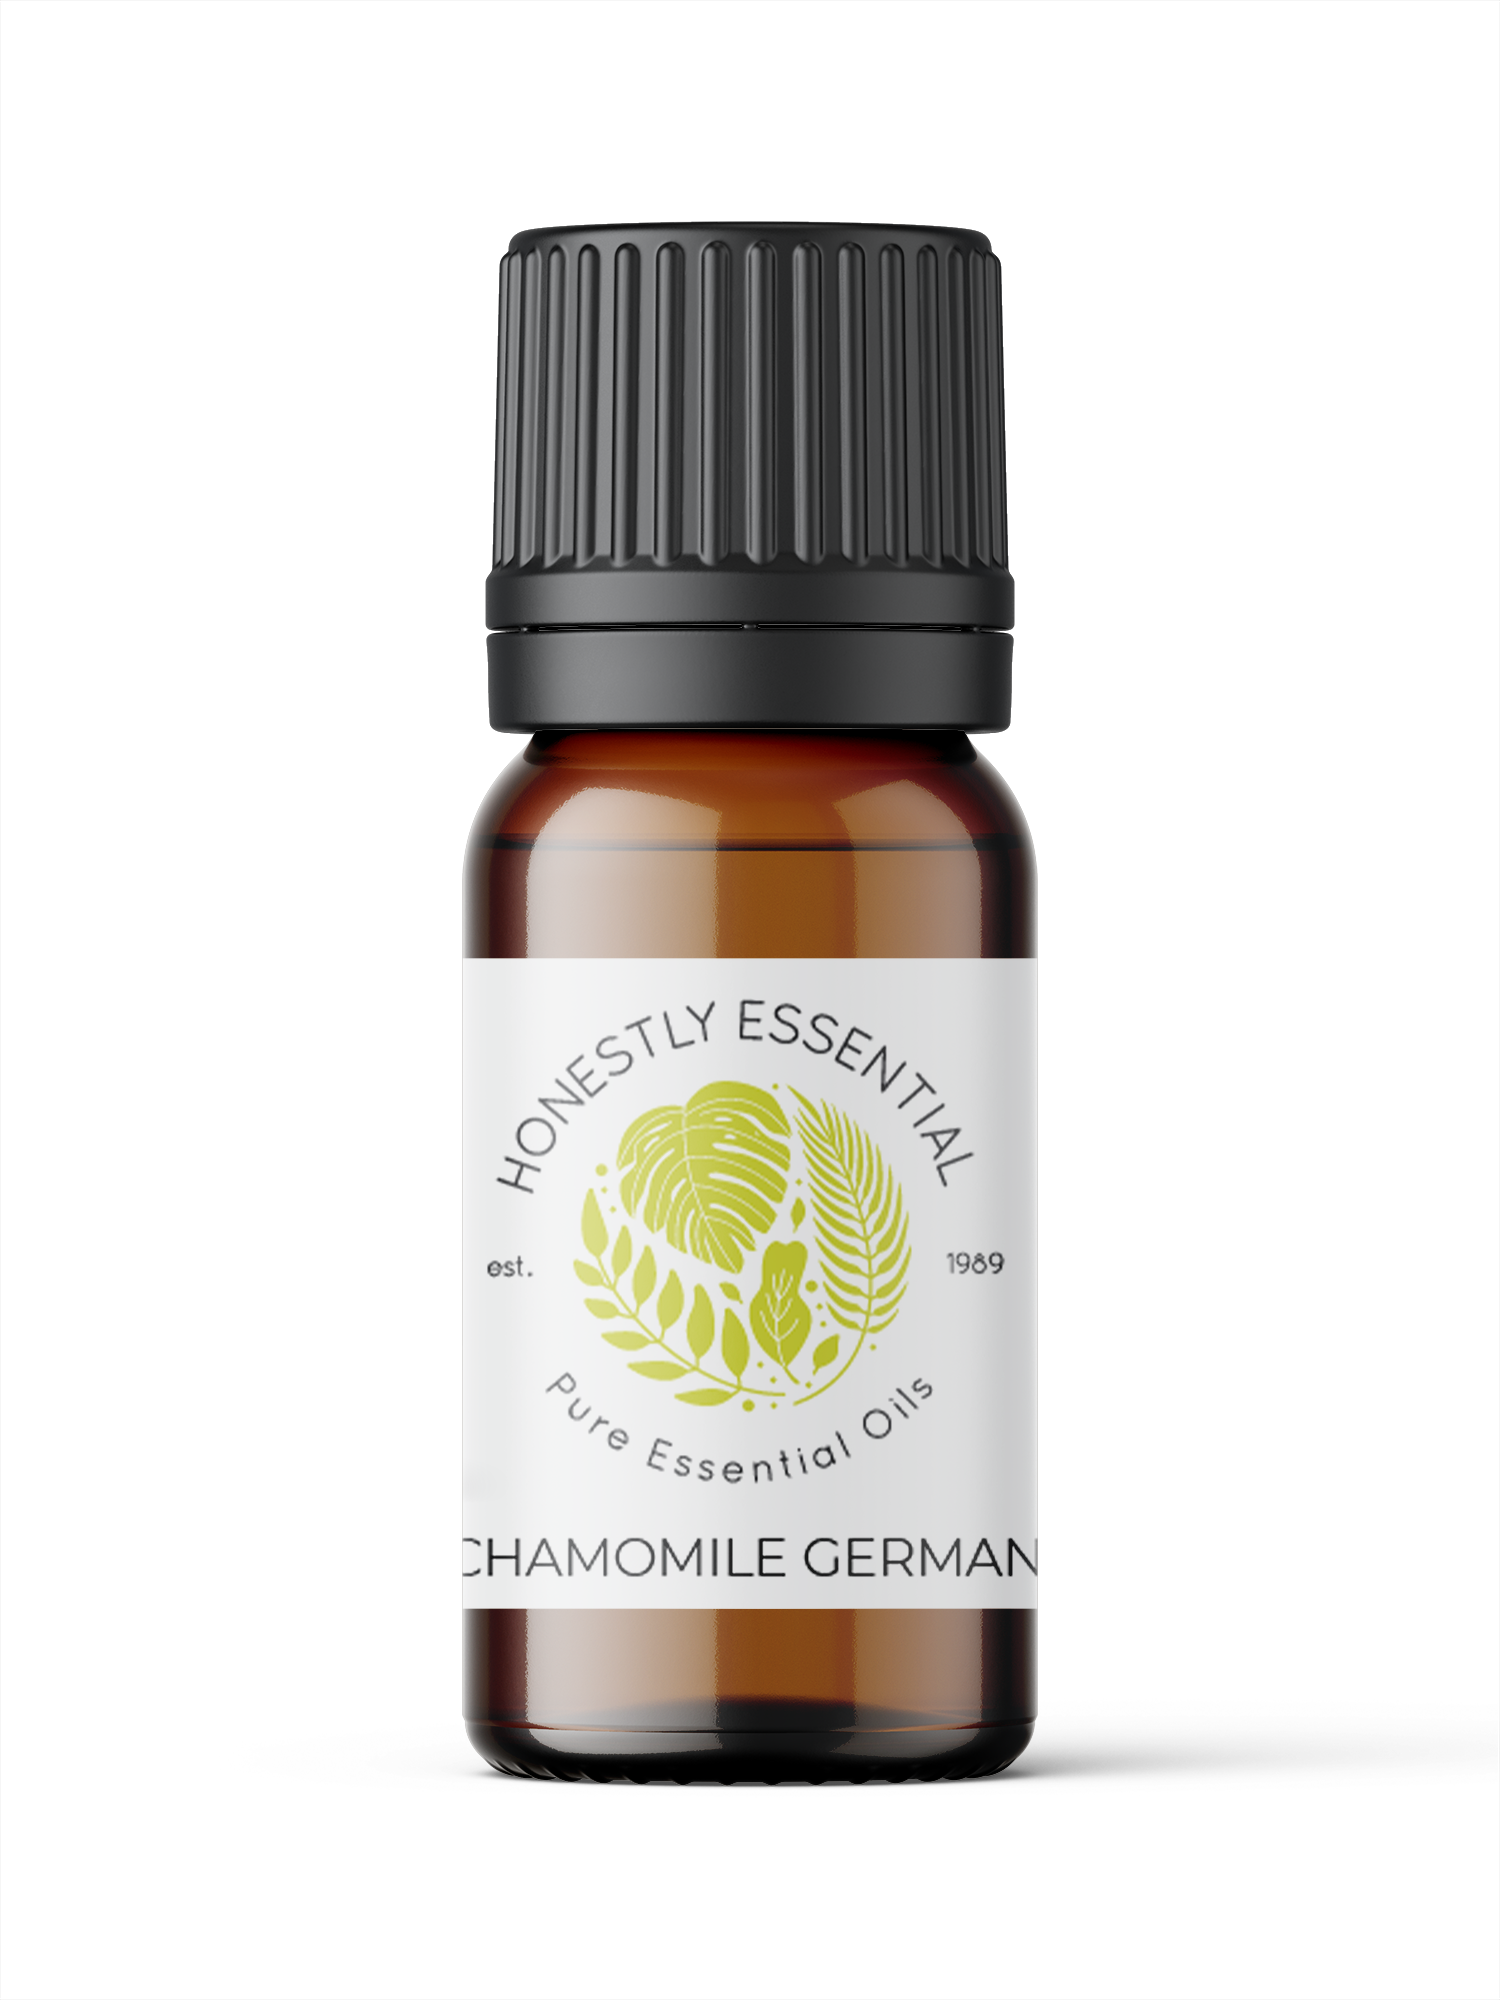 Chamomile German Essential Oil - Essential Oils | Honestly Essential Oils bruising, flower, flower essential oil, flowers, immunity, pain, pain reliever, sores, wounds